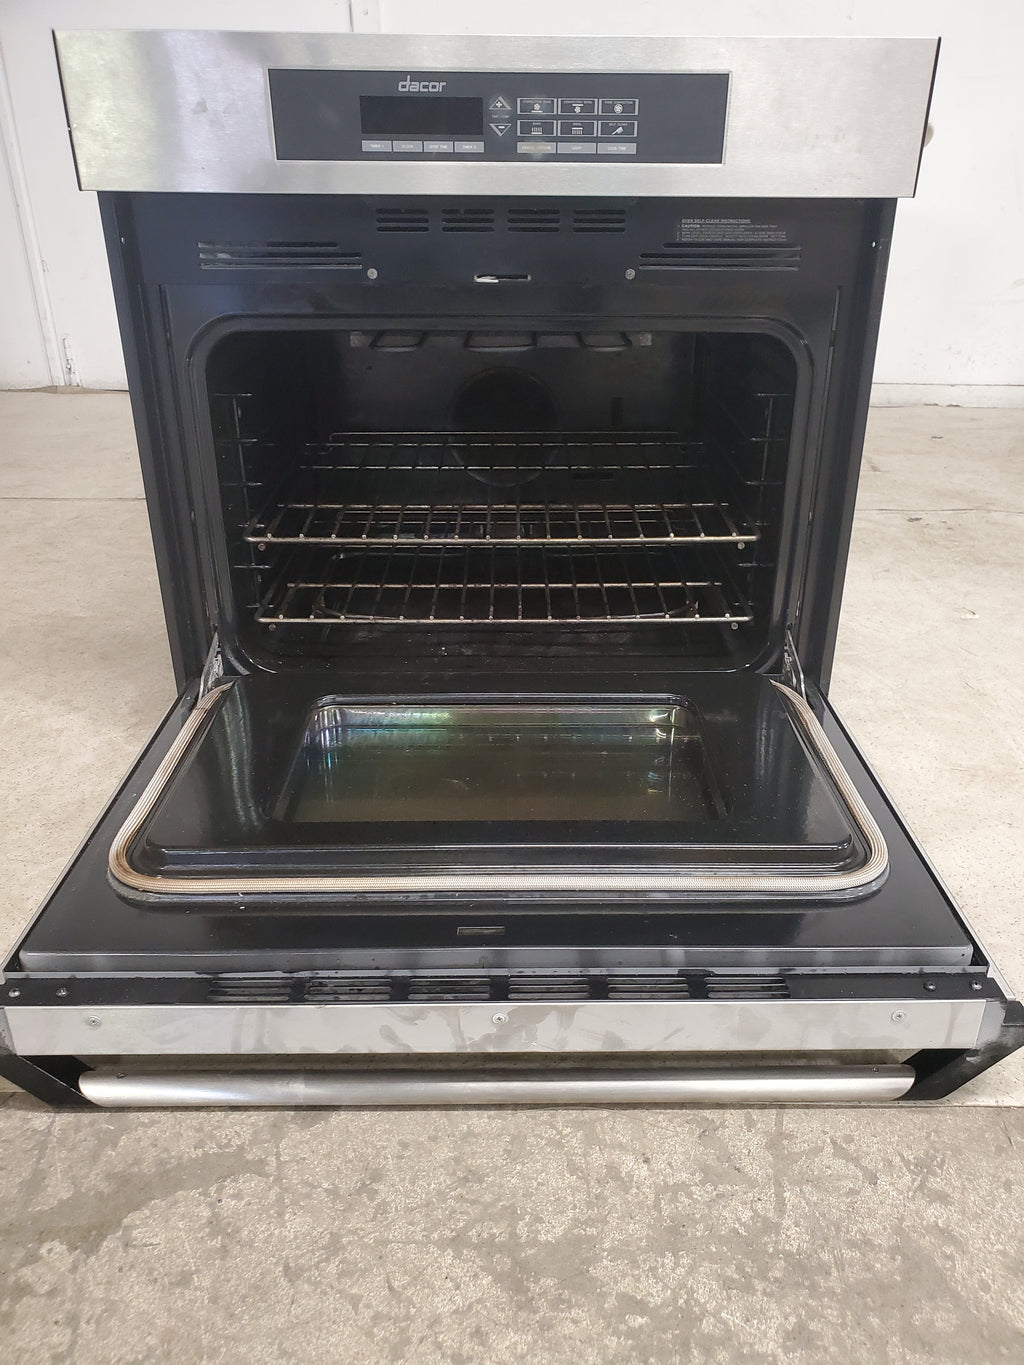 30''W Dacor Stainless Steel Wall Oven